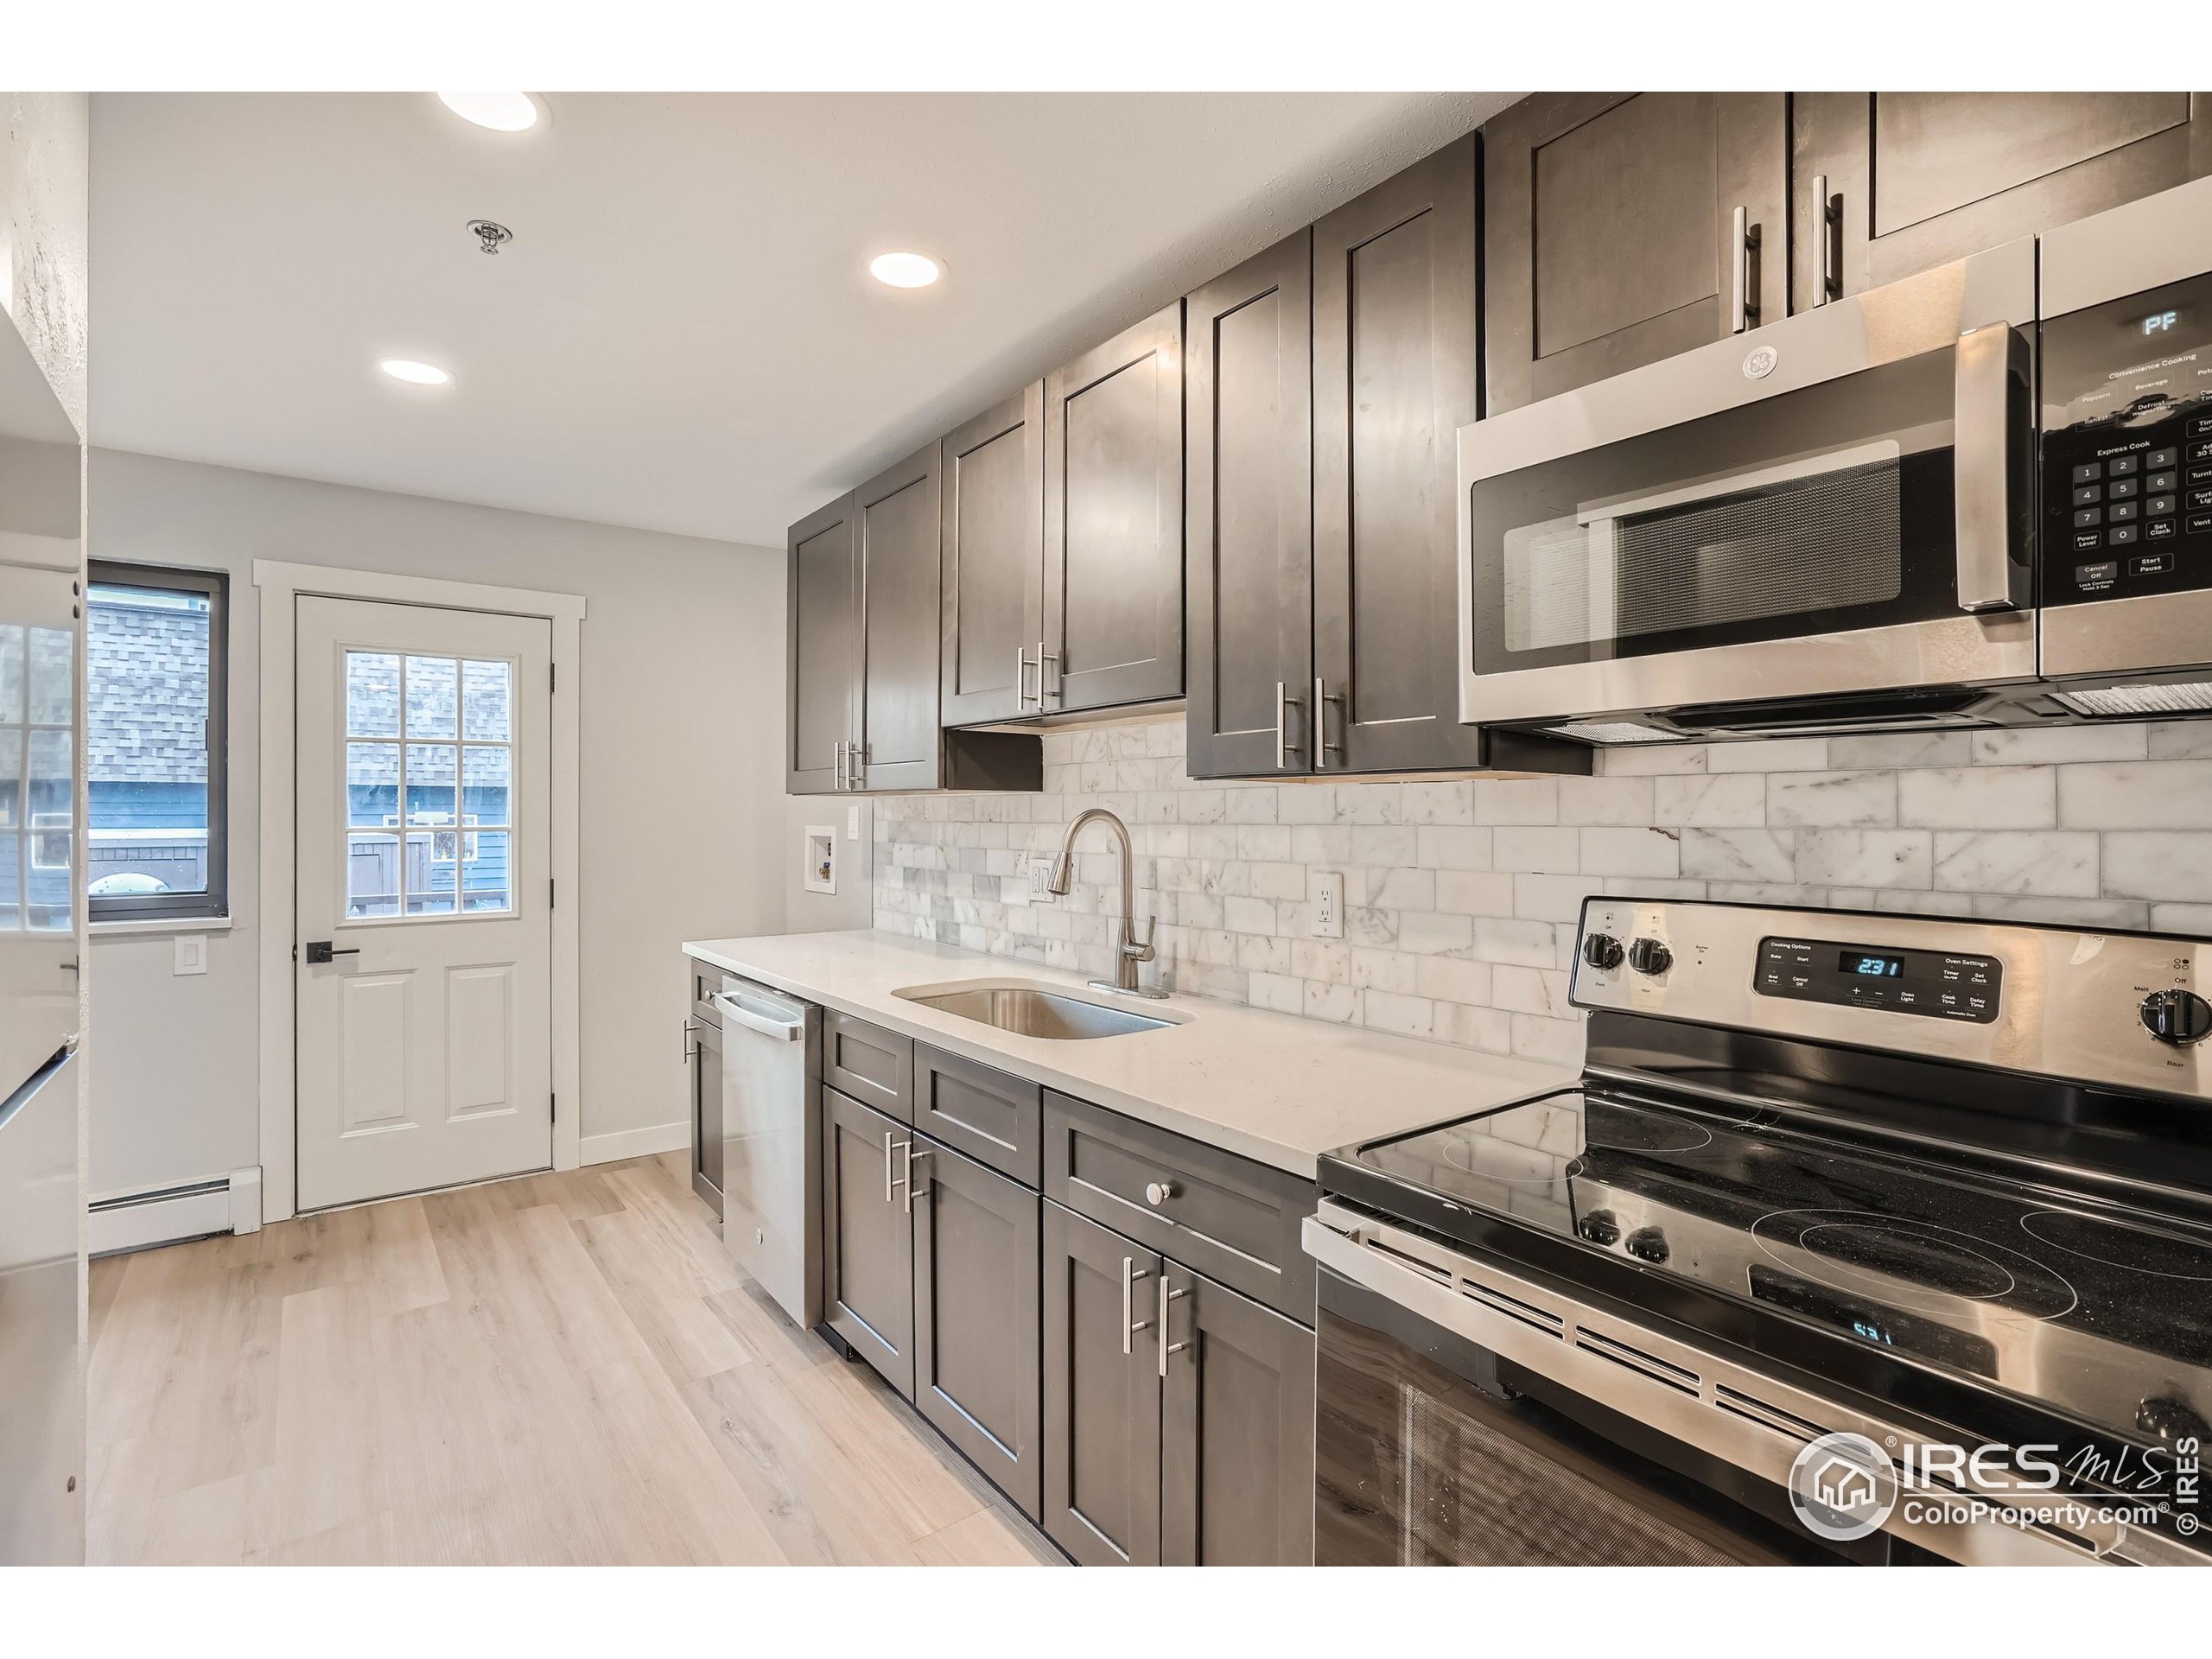 a kitchen with stainless steel appliances kitchen island granite countertop a sink stove and microwave